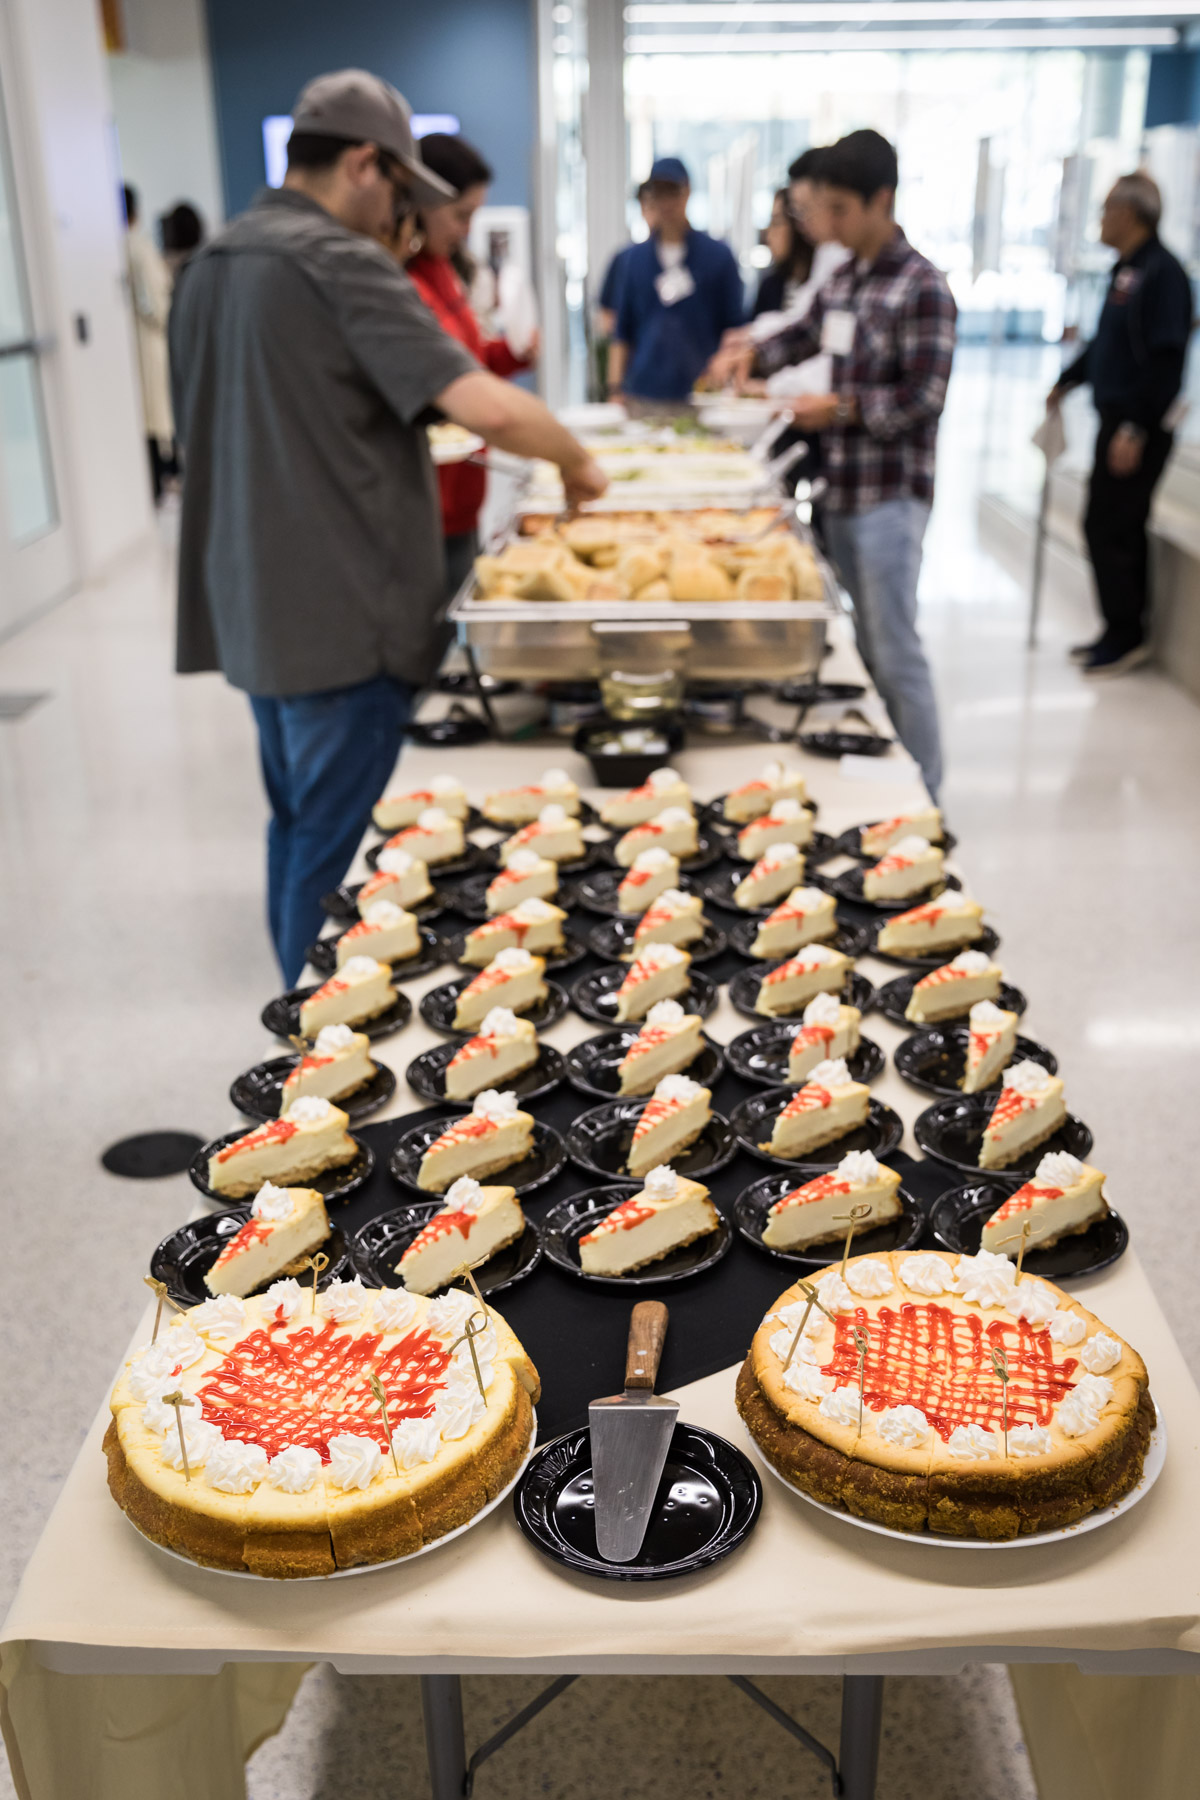 Table of treats and pies at a UTSA conference